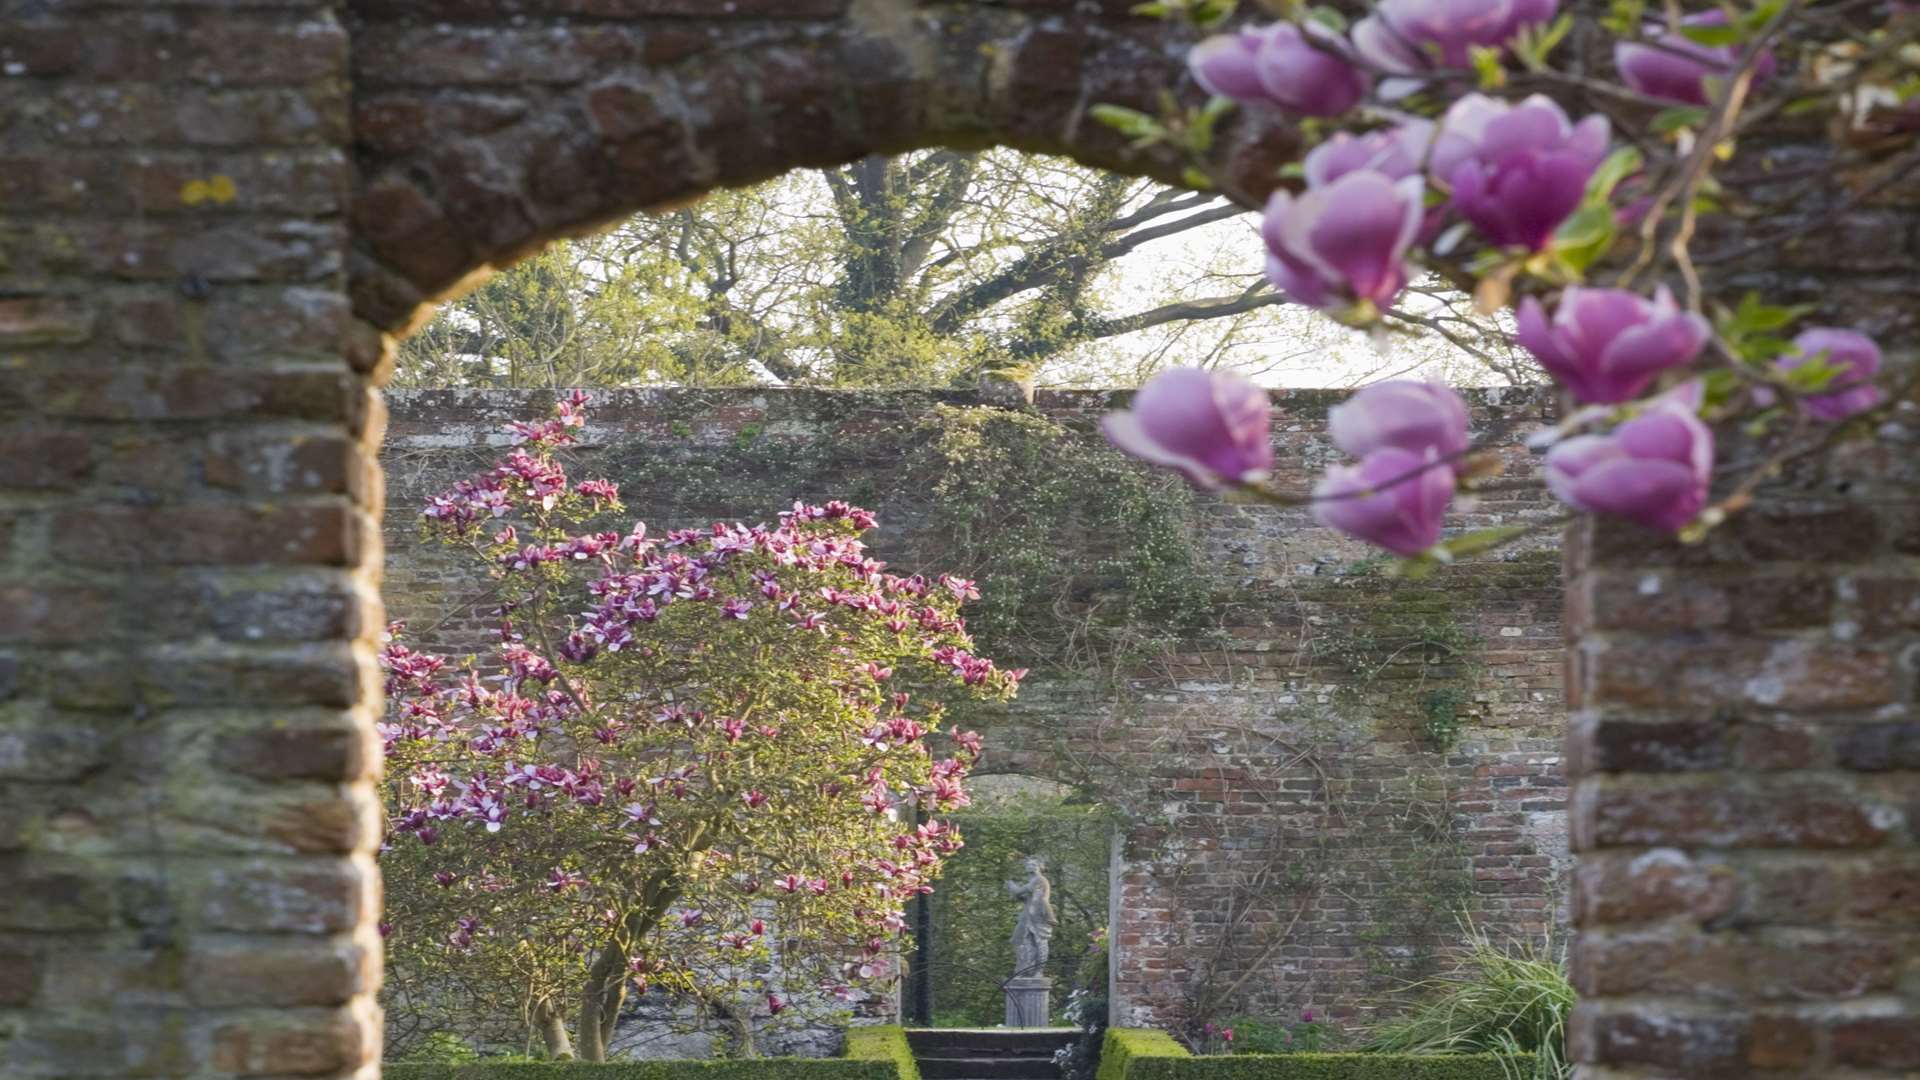 Sissinghurst Castle hosts the International Garden Photographer of the Year Exhibition Picture: National Trust